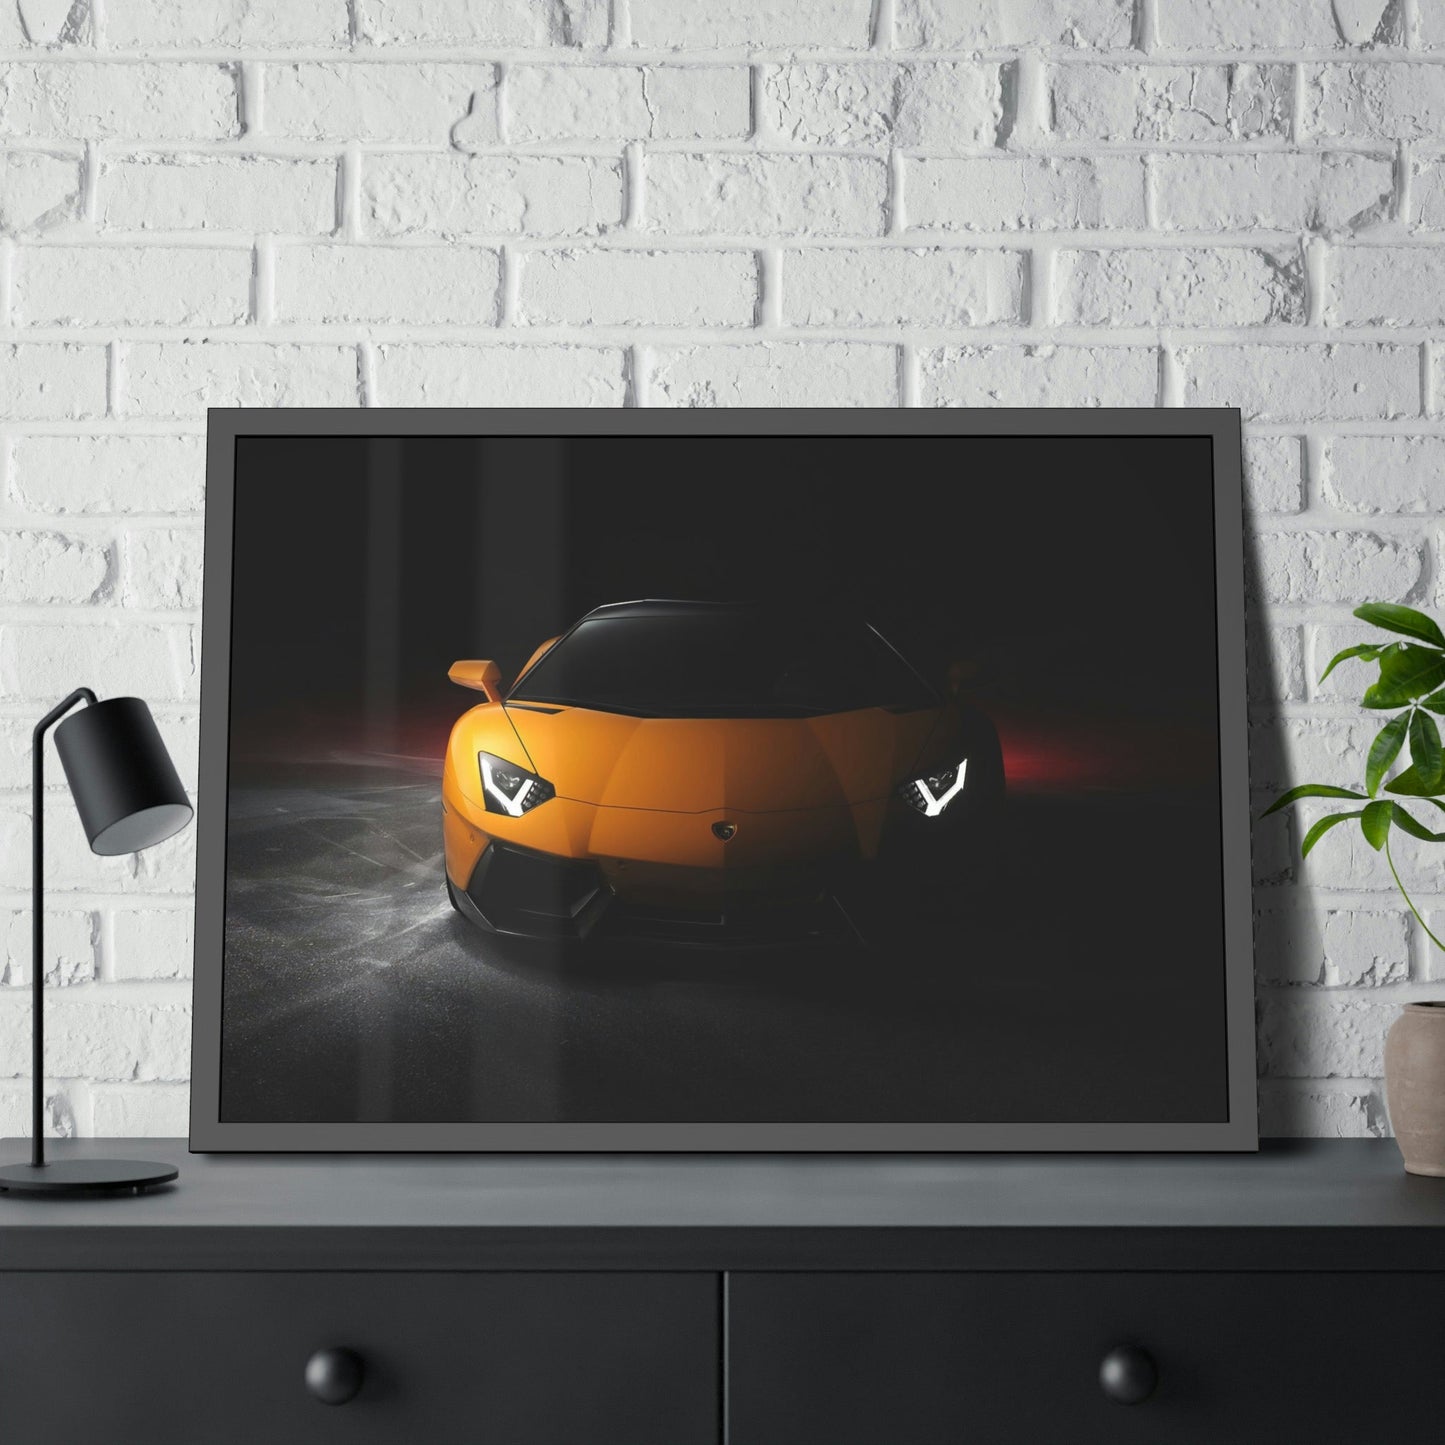 Lamborghini The Power of Elegance: Art and Wall Decor on Natural Canvas